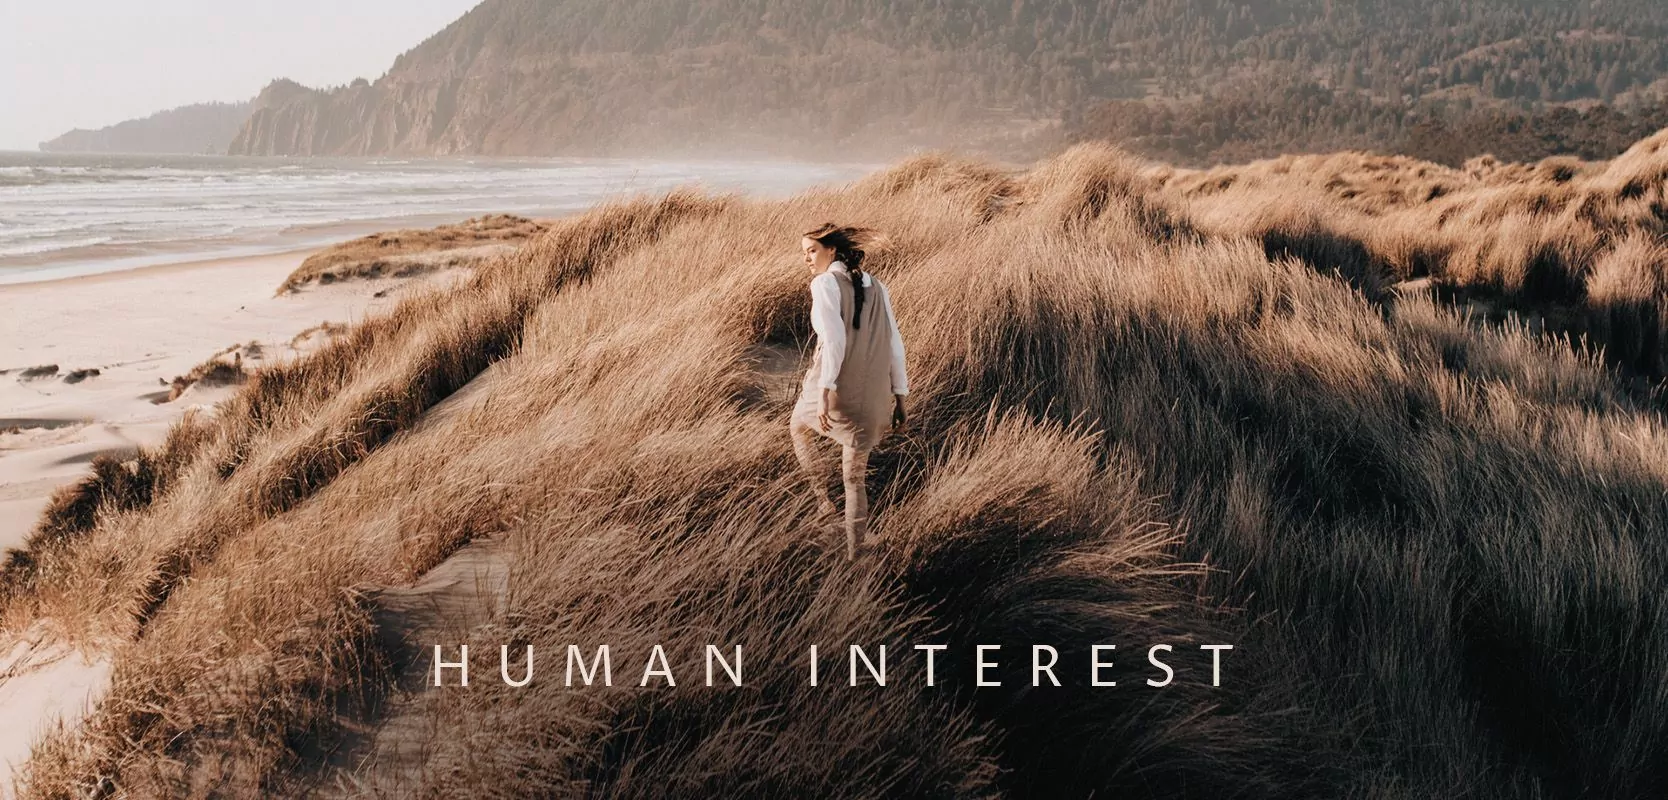 human interest poster for documentary background music